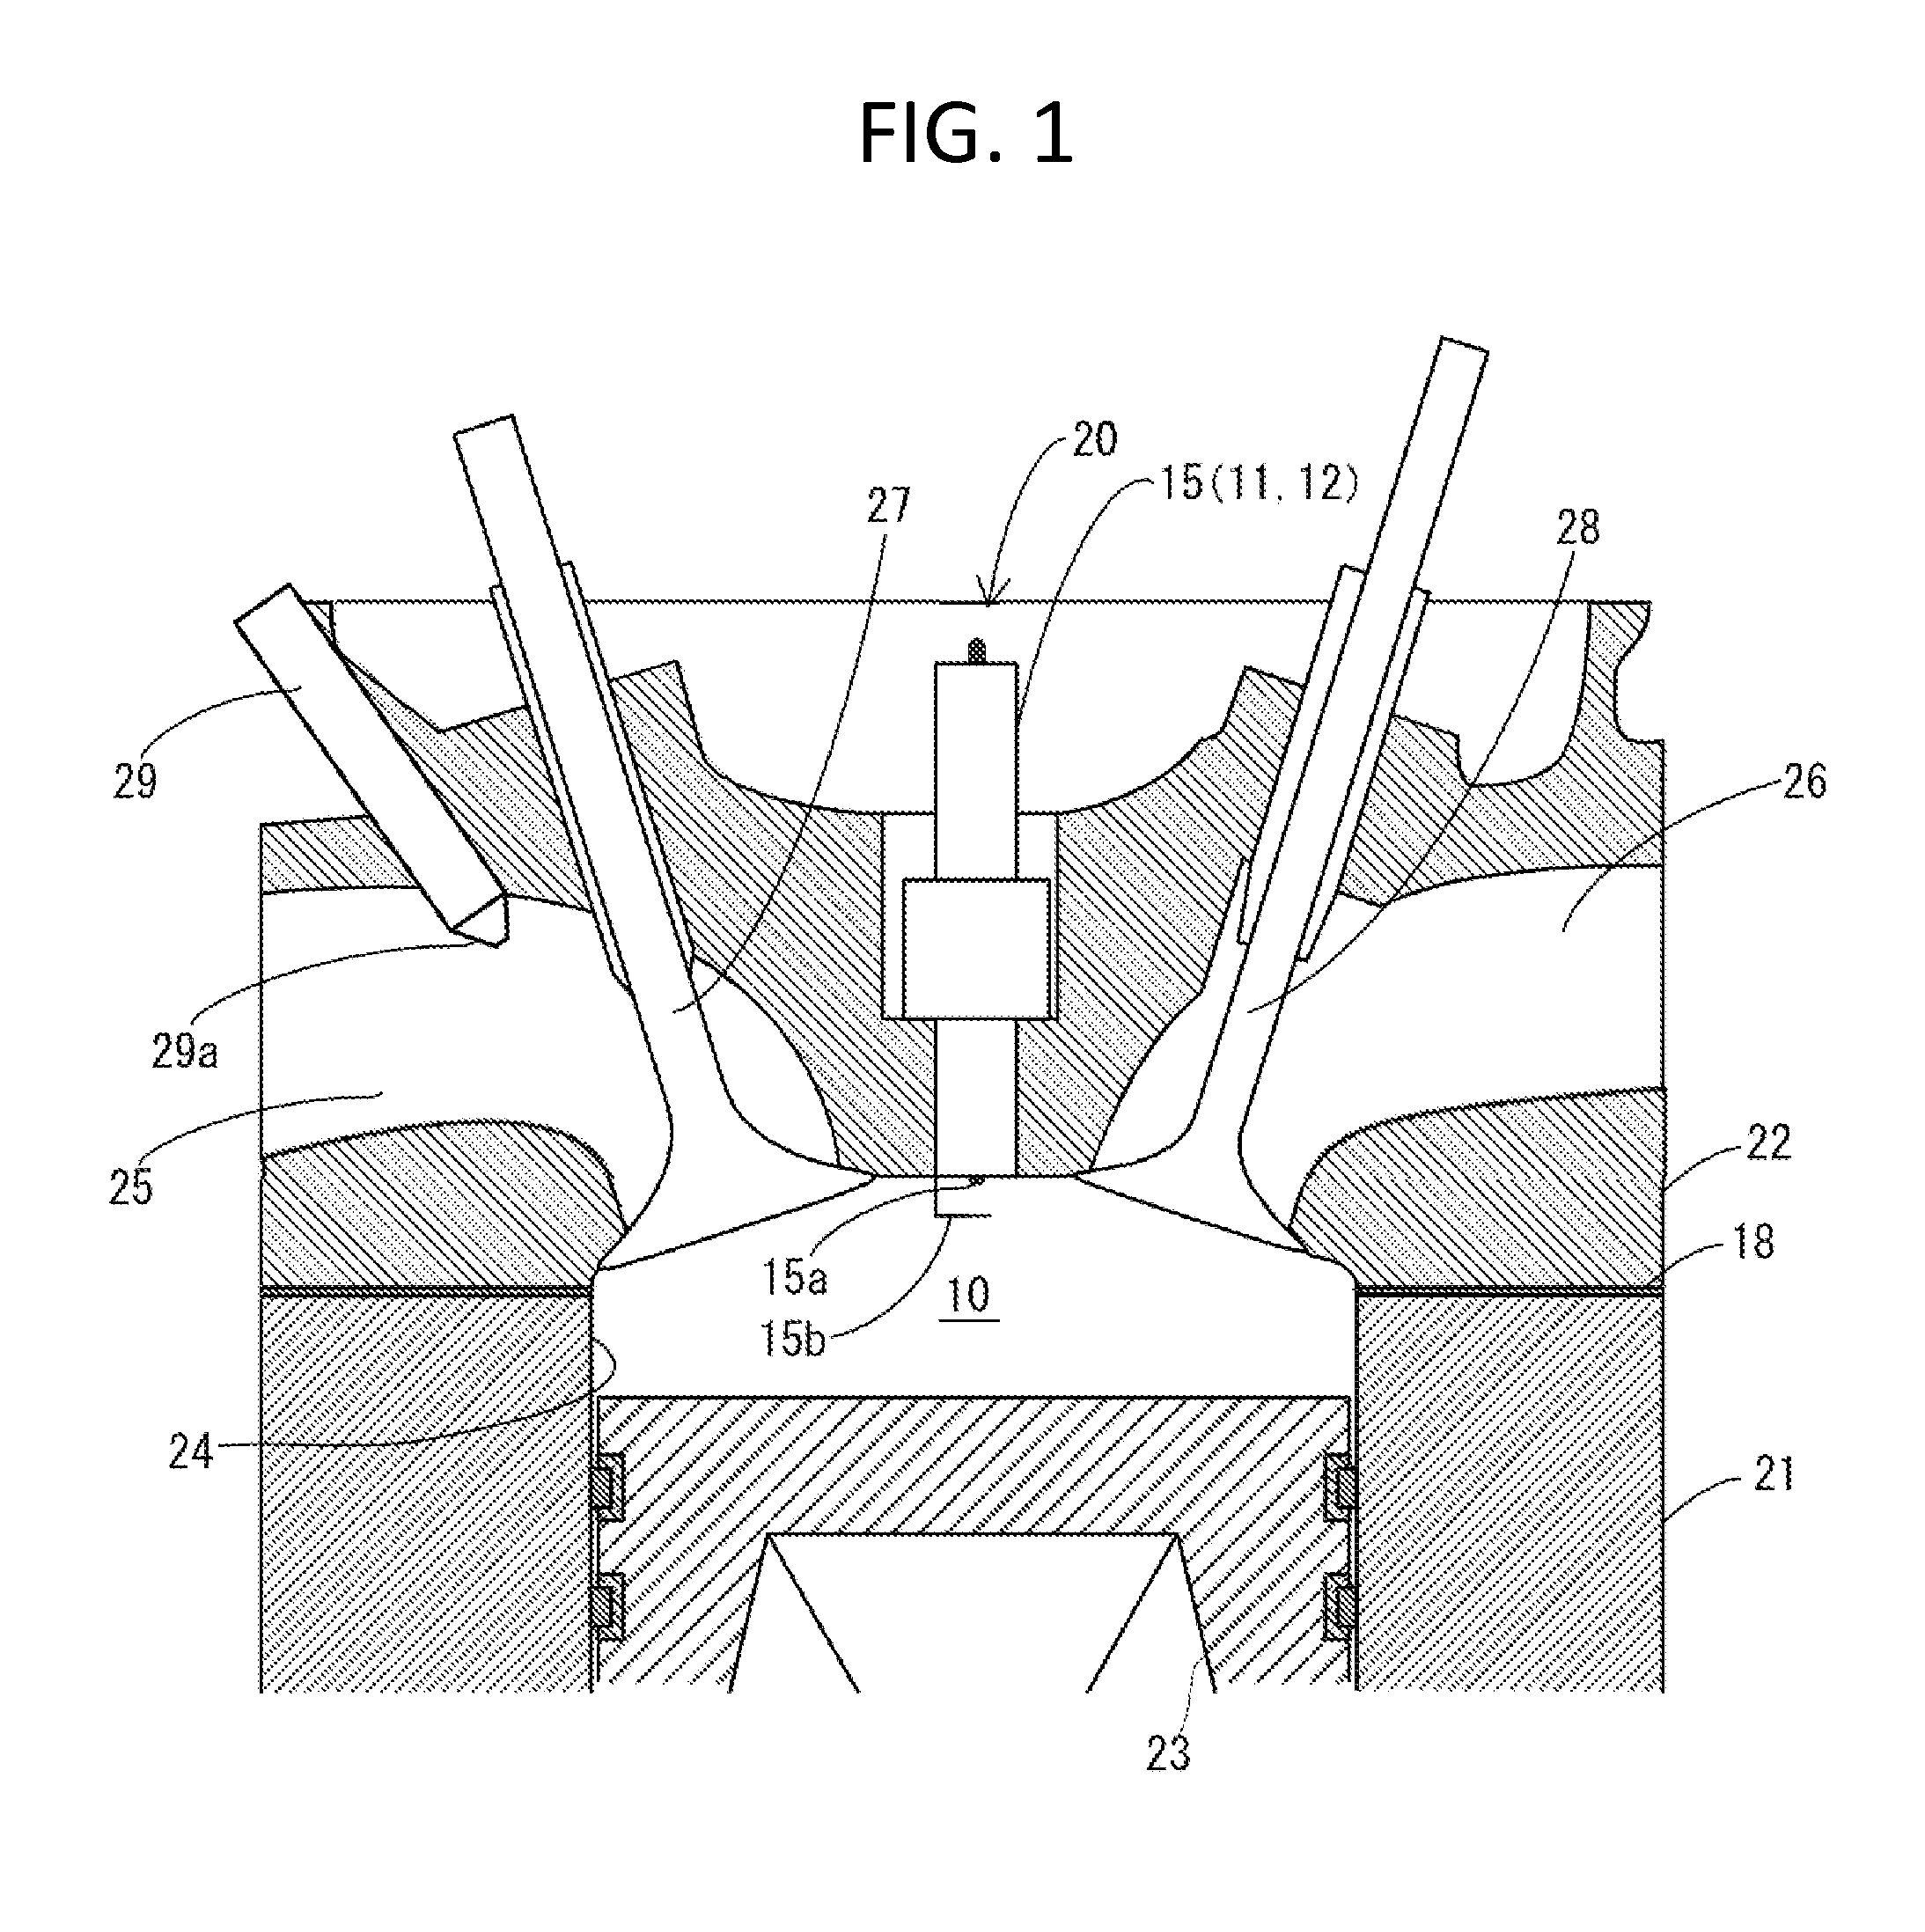 Ignition control device